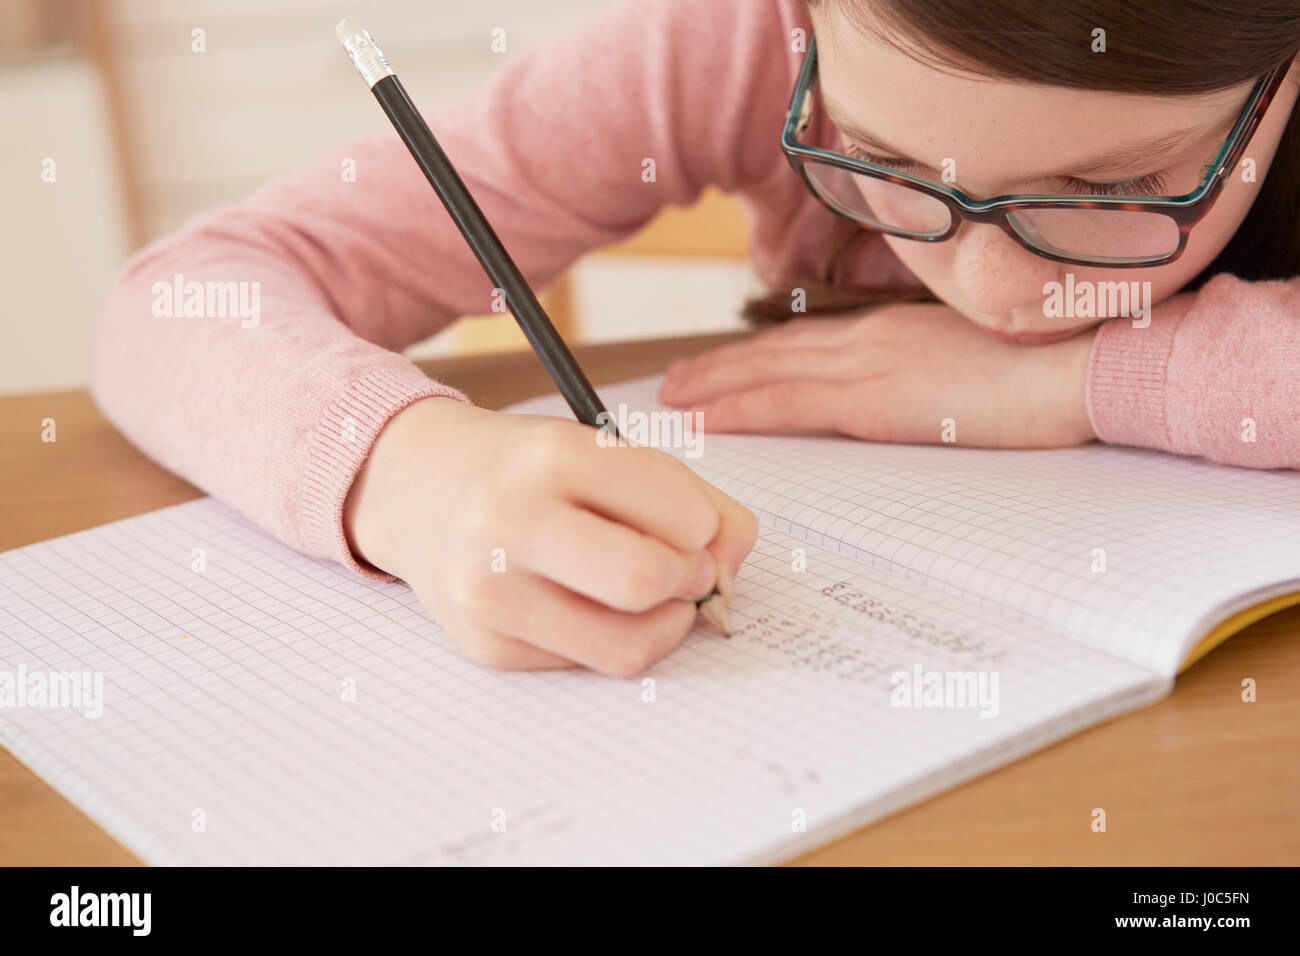 Close up of girl doing homework at table Banque D'Images